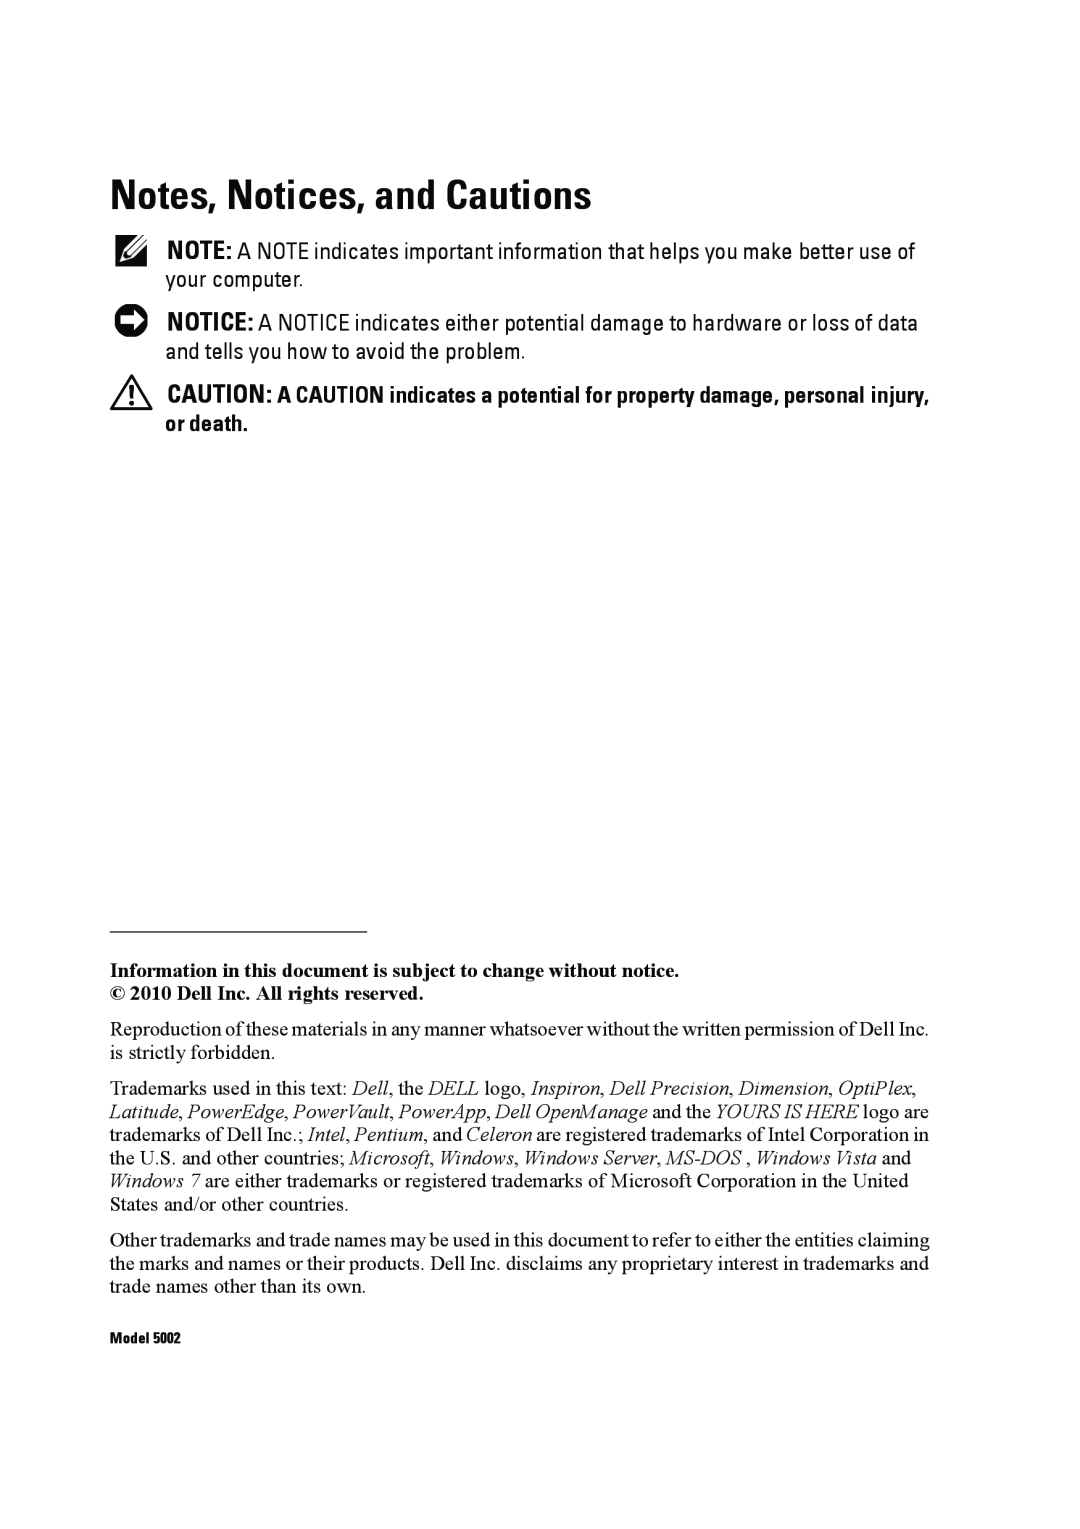 Dell 5002 manual Notes, Notices, and Cautions 